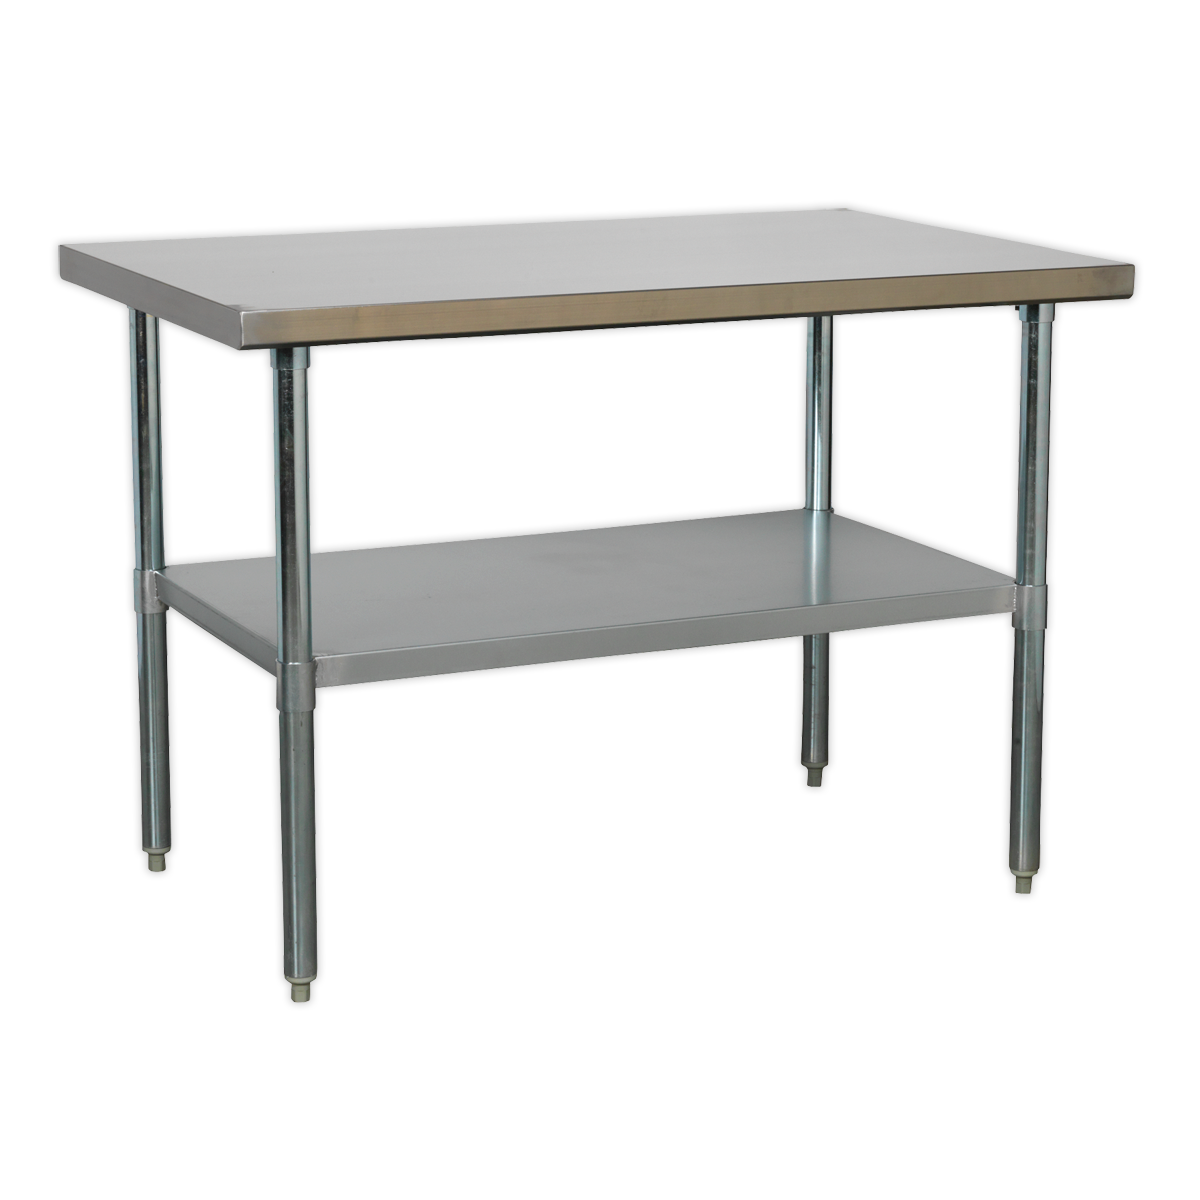 Stainless Steel Workbench 1.2m - AP1248SS - Farming Parts